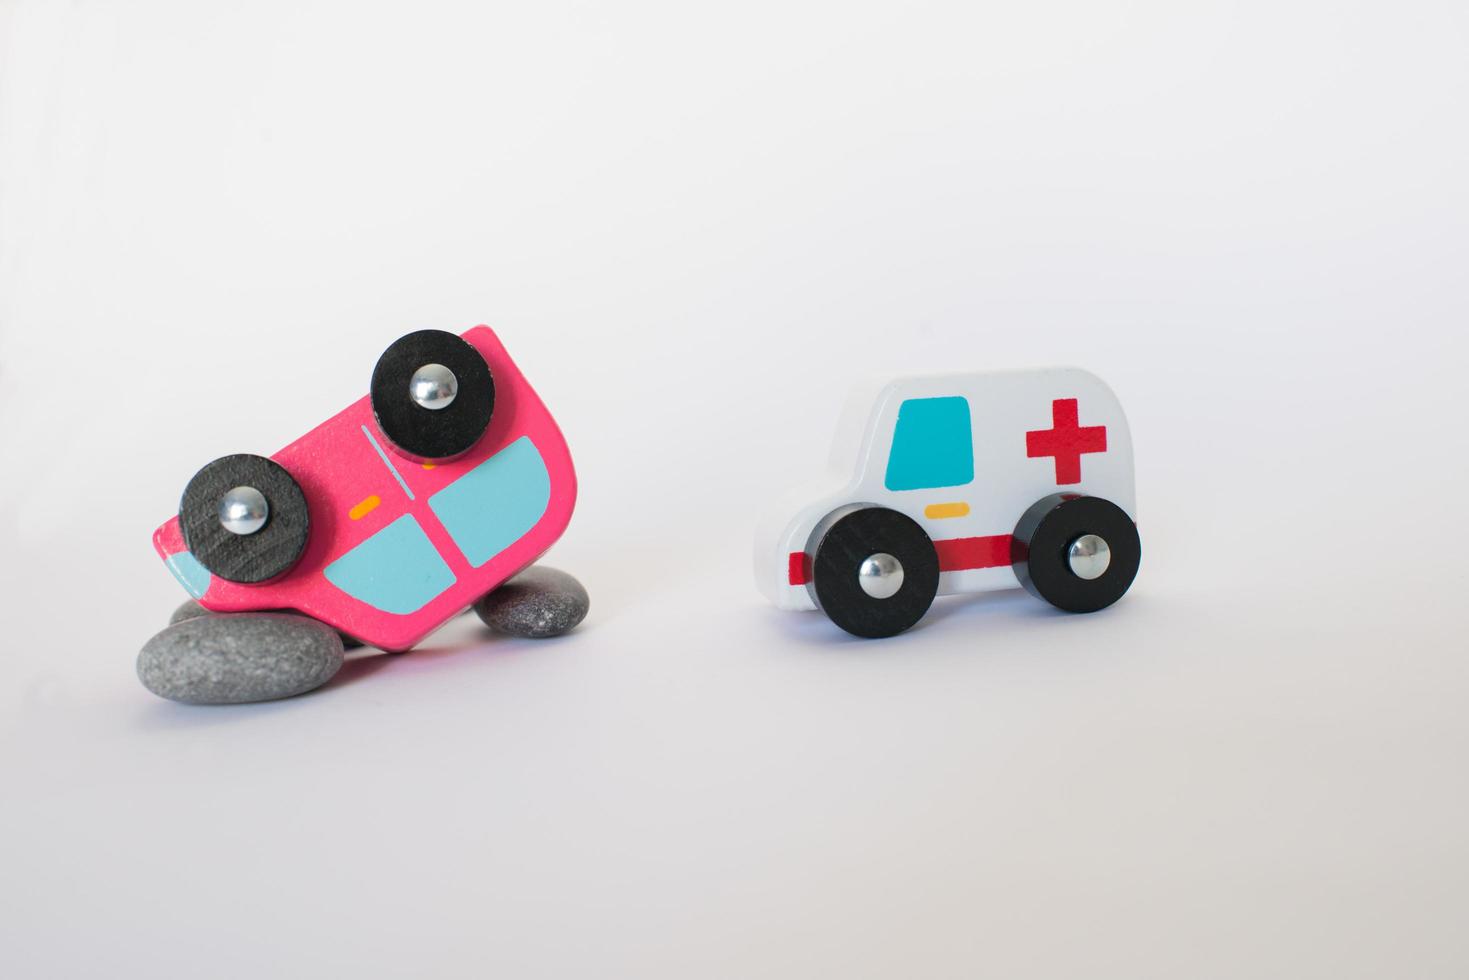 Ambulance arriving to help after a car accident. Toy wooden vehicles, a pink car turned over and an ambulance with white background photo